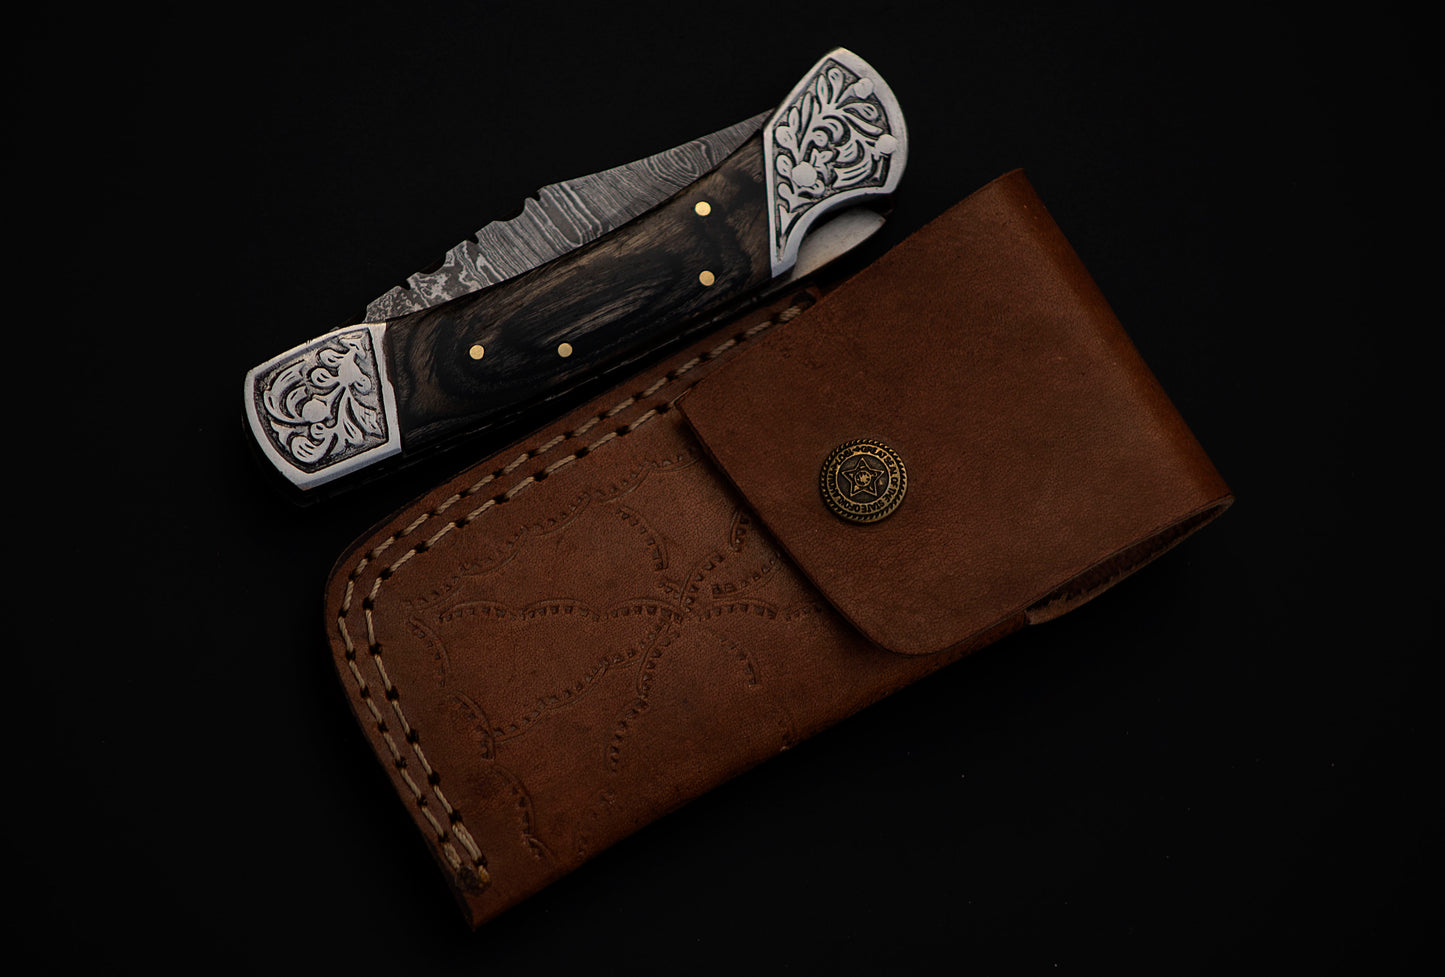 9" long back lock Folding Knife, Black wood Scale with Engraved steel bolster, custom made 4" Hand Forged Damascus steel blade, Cow hide leather sheath with belt loop